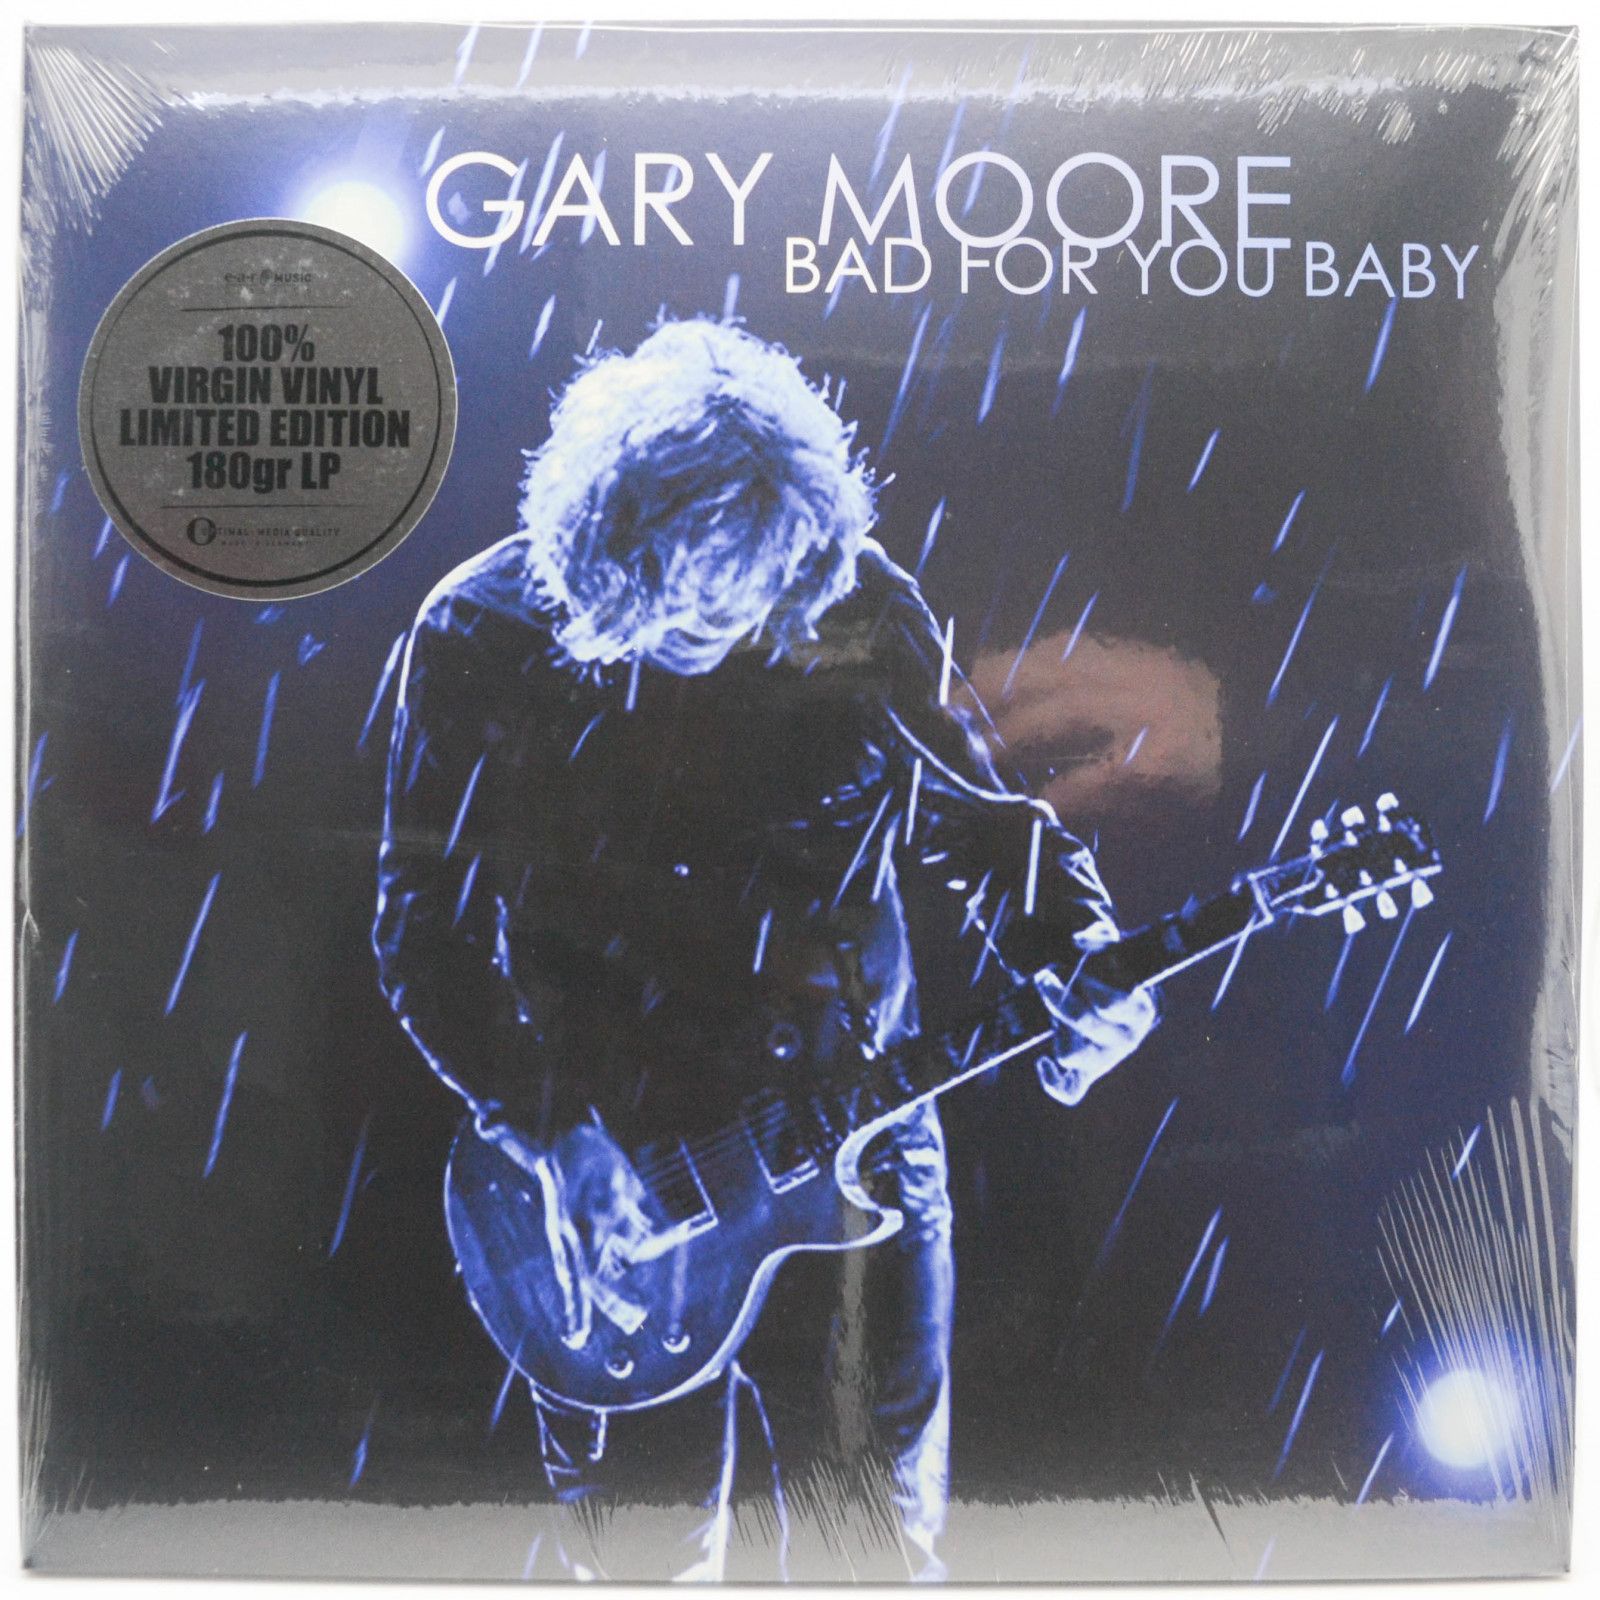 Gary Moore — Bad For You Baby (2LP), 2008